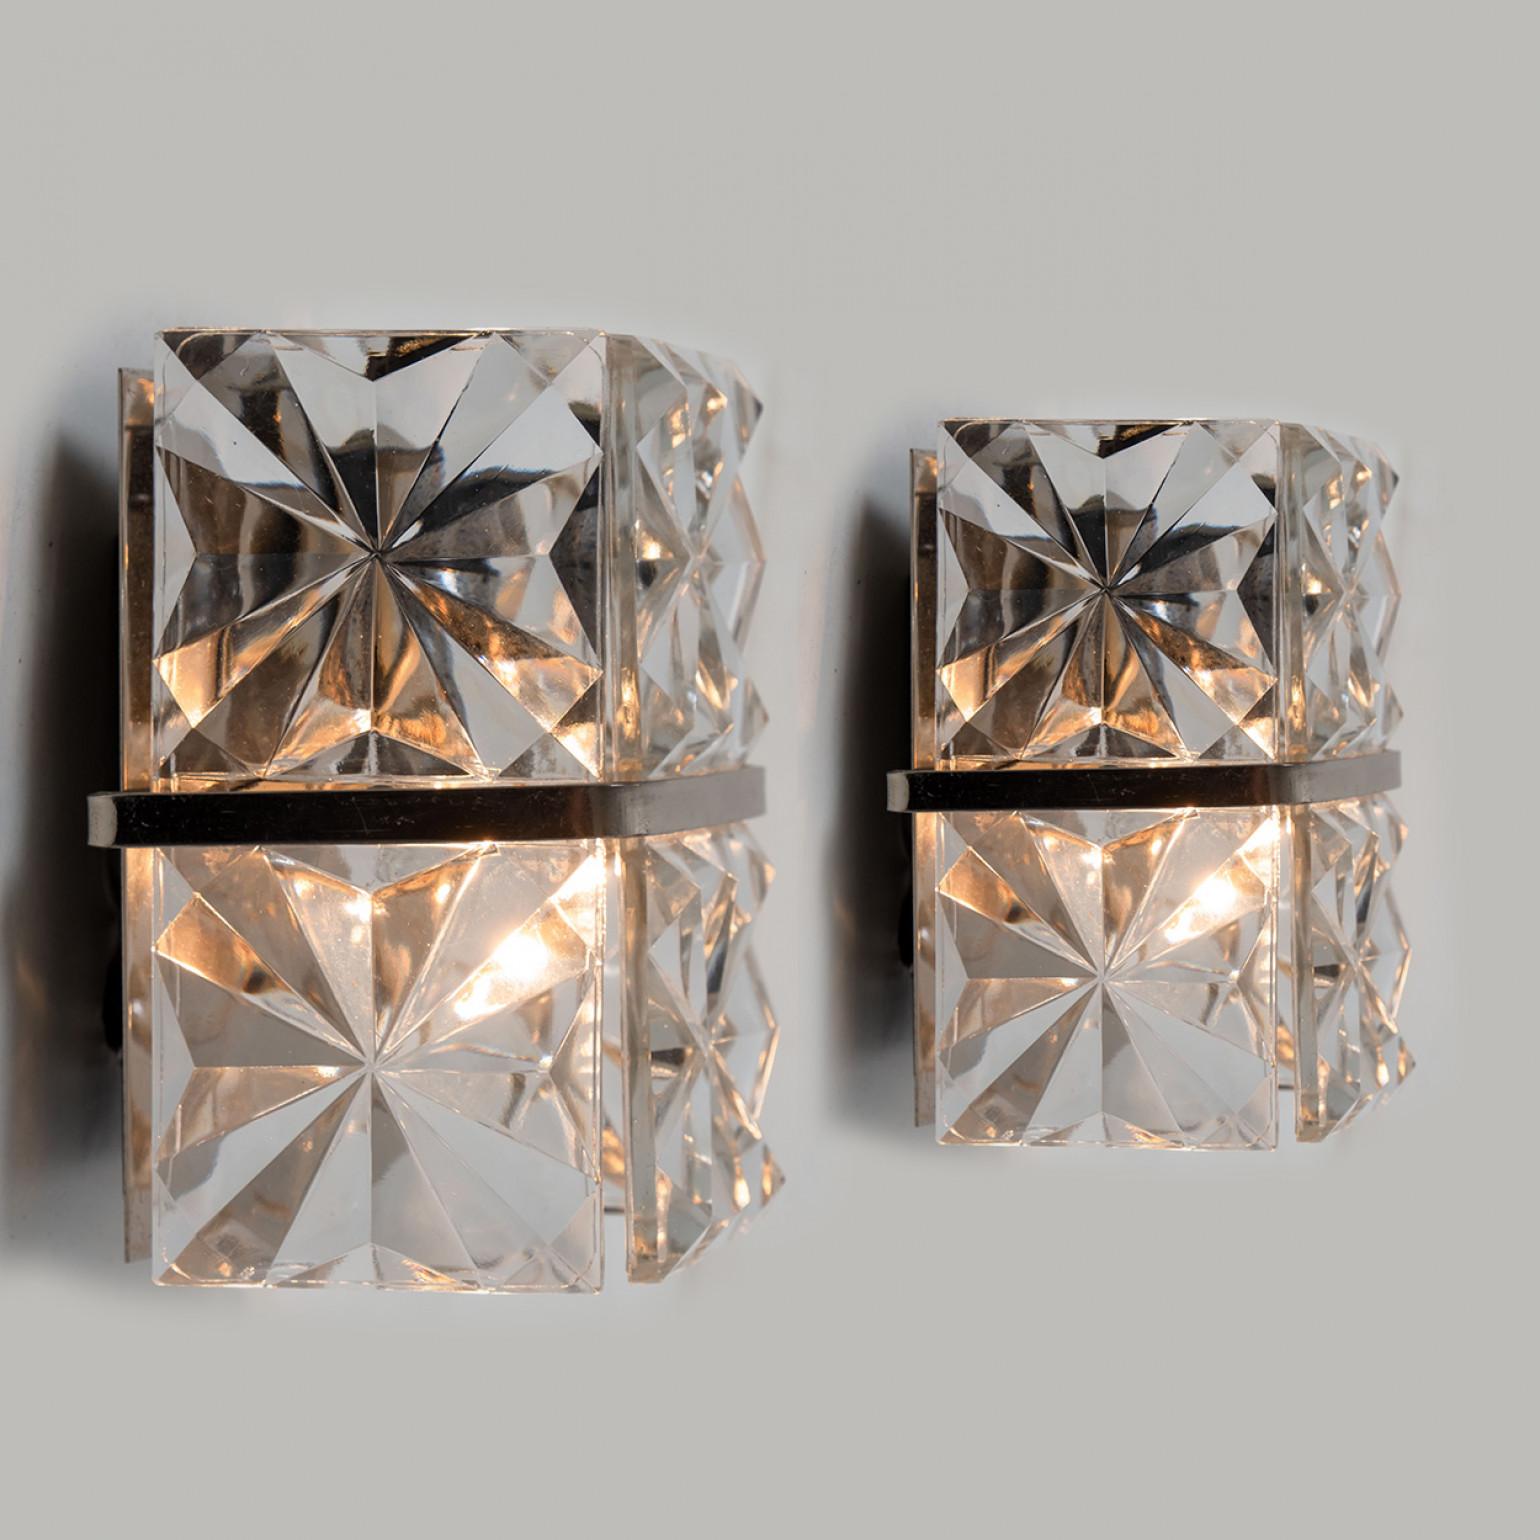 1 of the 2 Square Crystal and Silver Chrome Sconces by Kinkeldey, Germany, 1970 For Sale 2